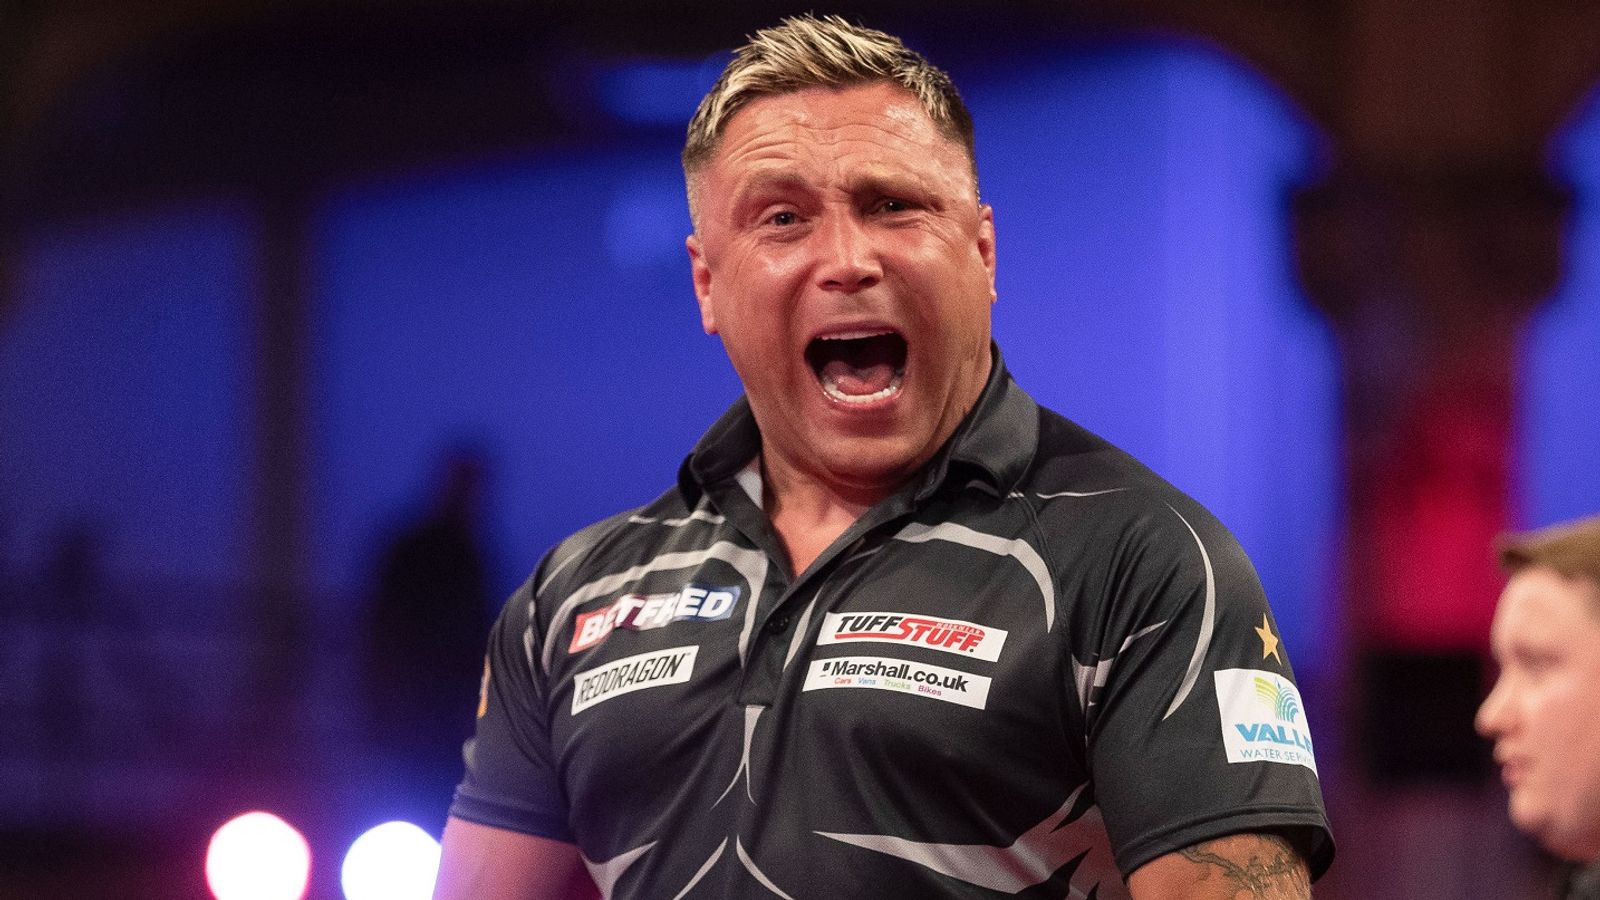 World Grand Prix Darts James Wade, Gerwyn Price and Michael Smith all in action recap! Darts News Sky Sports